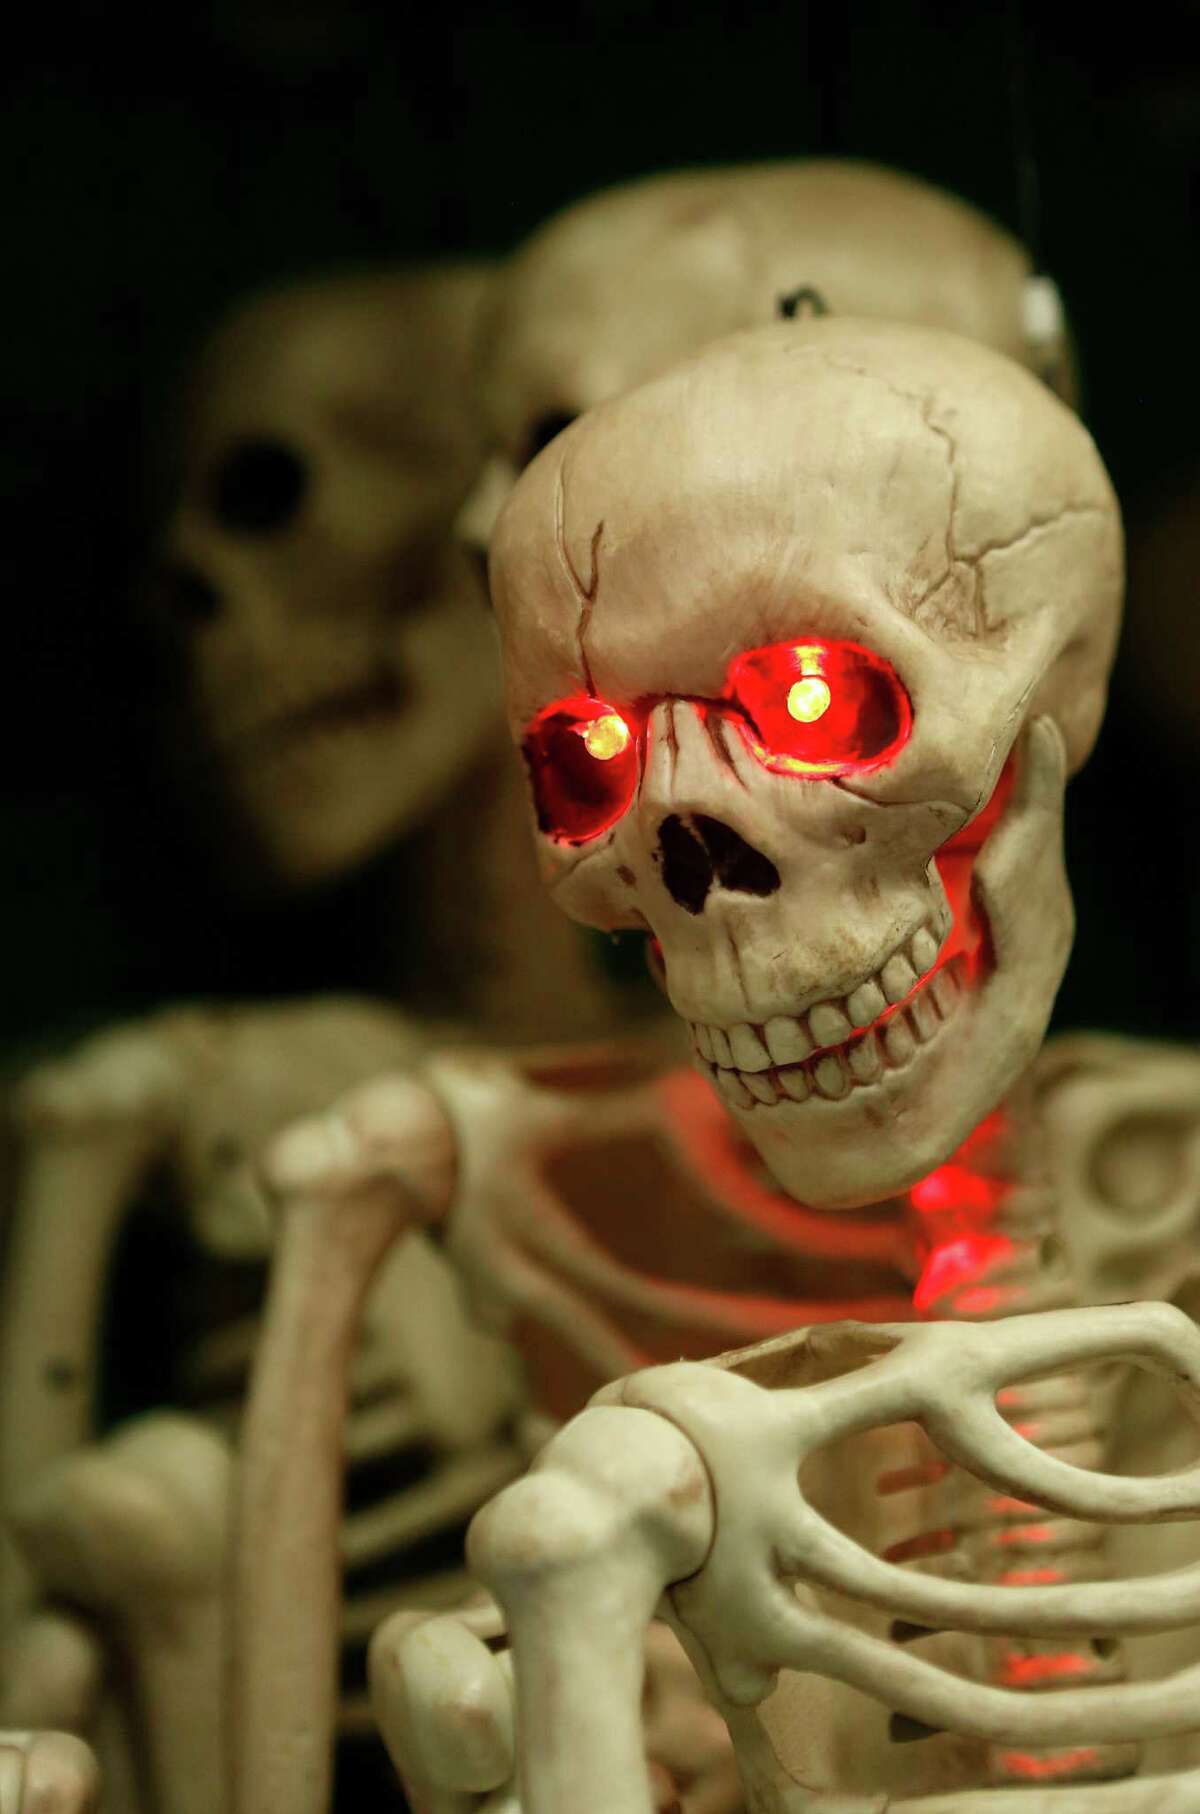 A skeleton's eyes light up at Party Boy, a costume and party supply store that contains everything from decorations to costume rentals to an onsite haunted house, Tuesday, Oct. 20, 2015, in Houston. ( Mark Mulligan / Houston Chronicle )